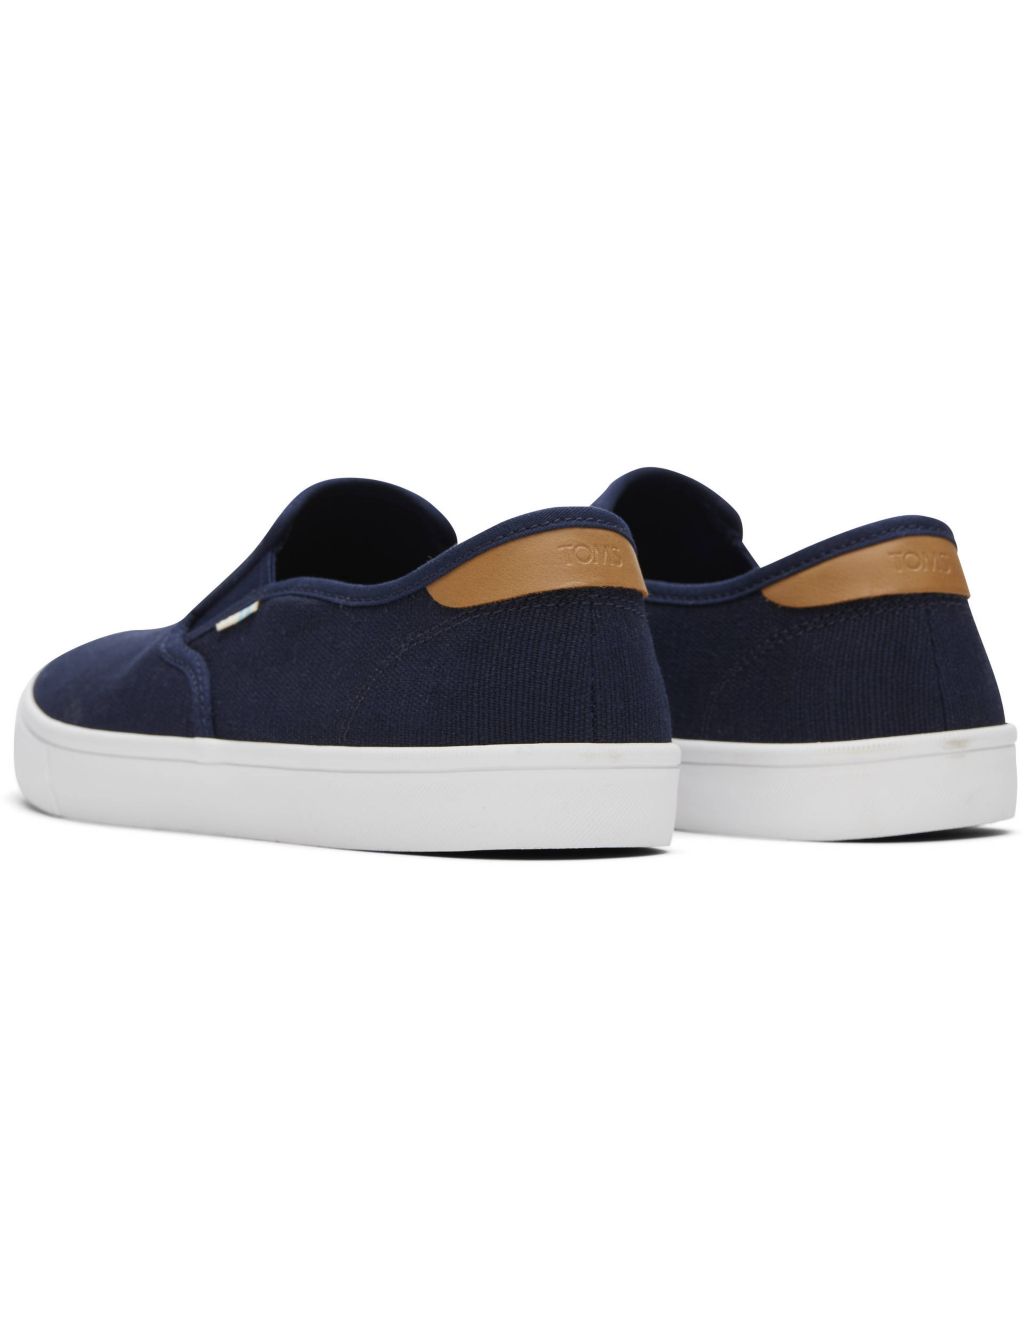 Canvas Slip-On Trainers image 4